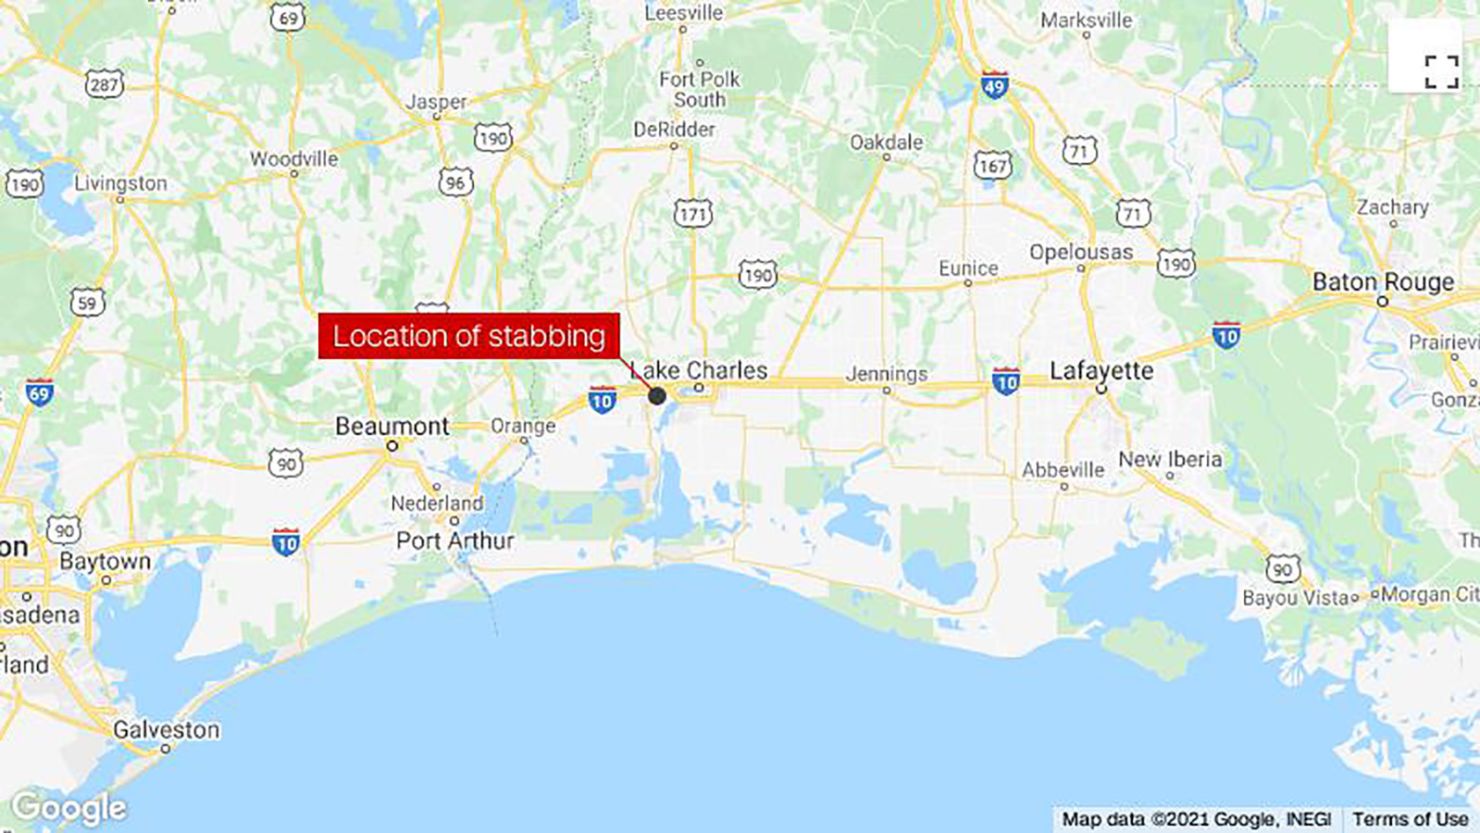 A 15-year-old girl was stabbed in Calcasieu Parish, Louisiana, on Saturday, January 23, 2021.